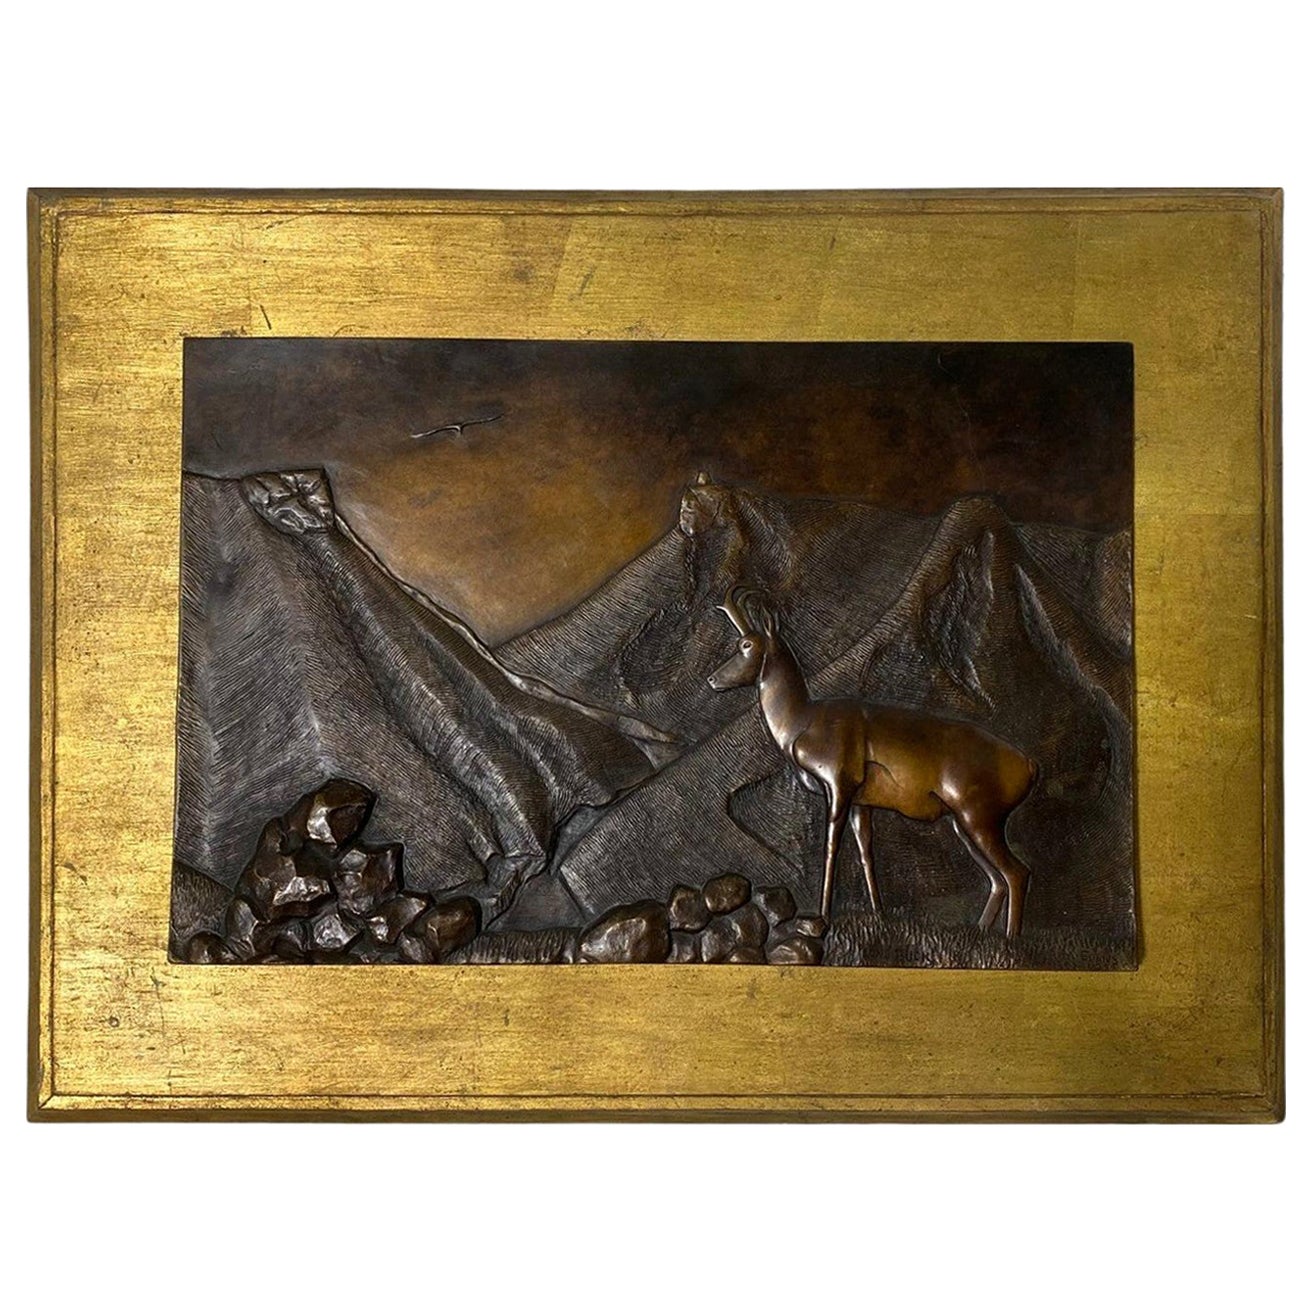 R M Evans Signed Limited Edition Bronze Wall Relief Plaque Sculpture Lone Buck For Sale